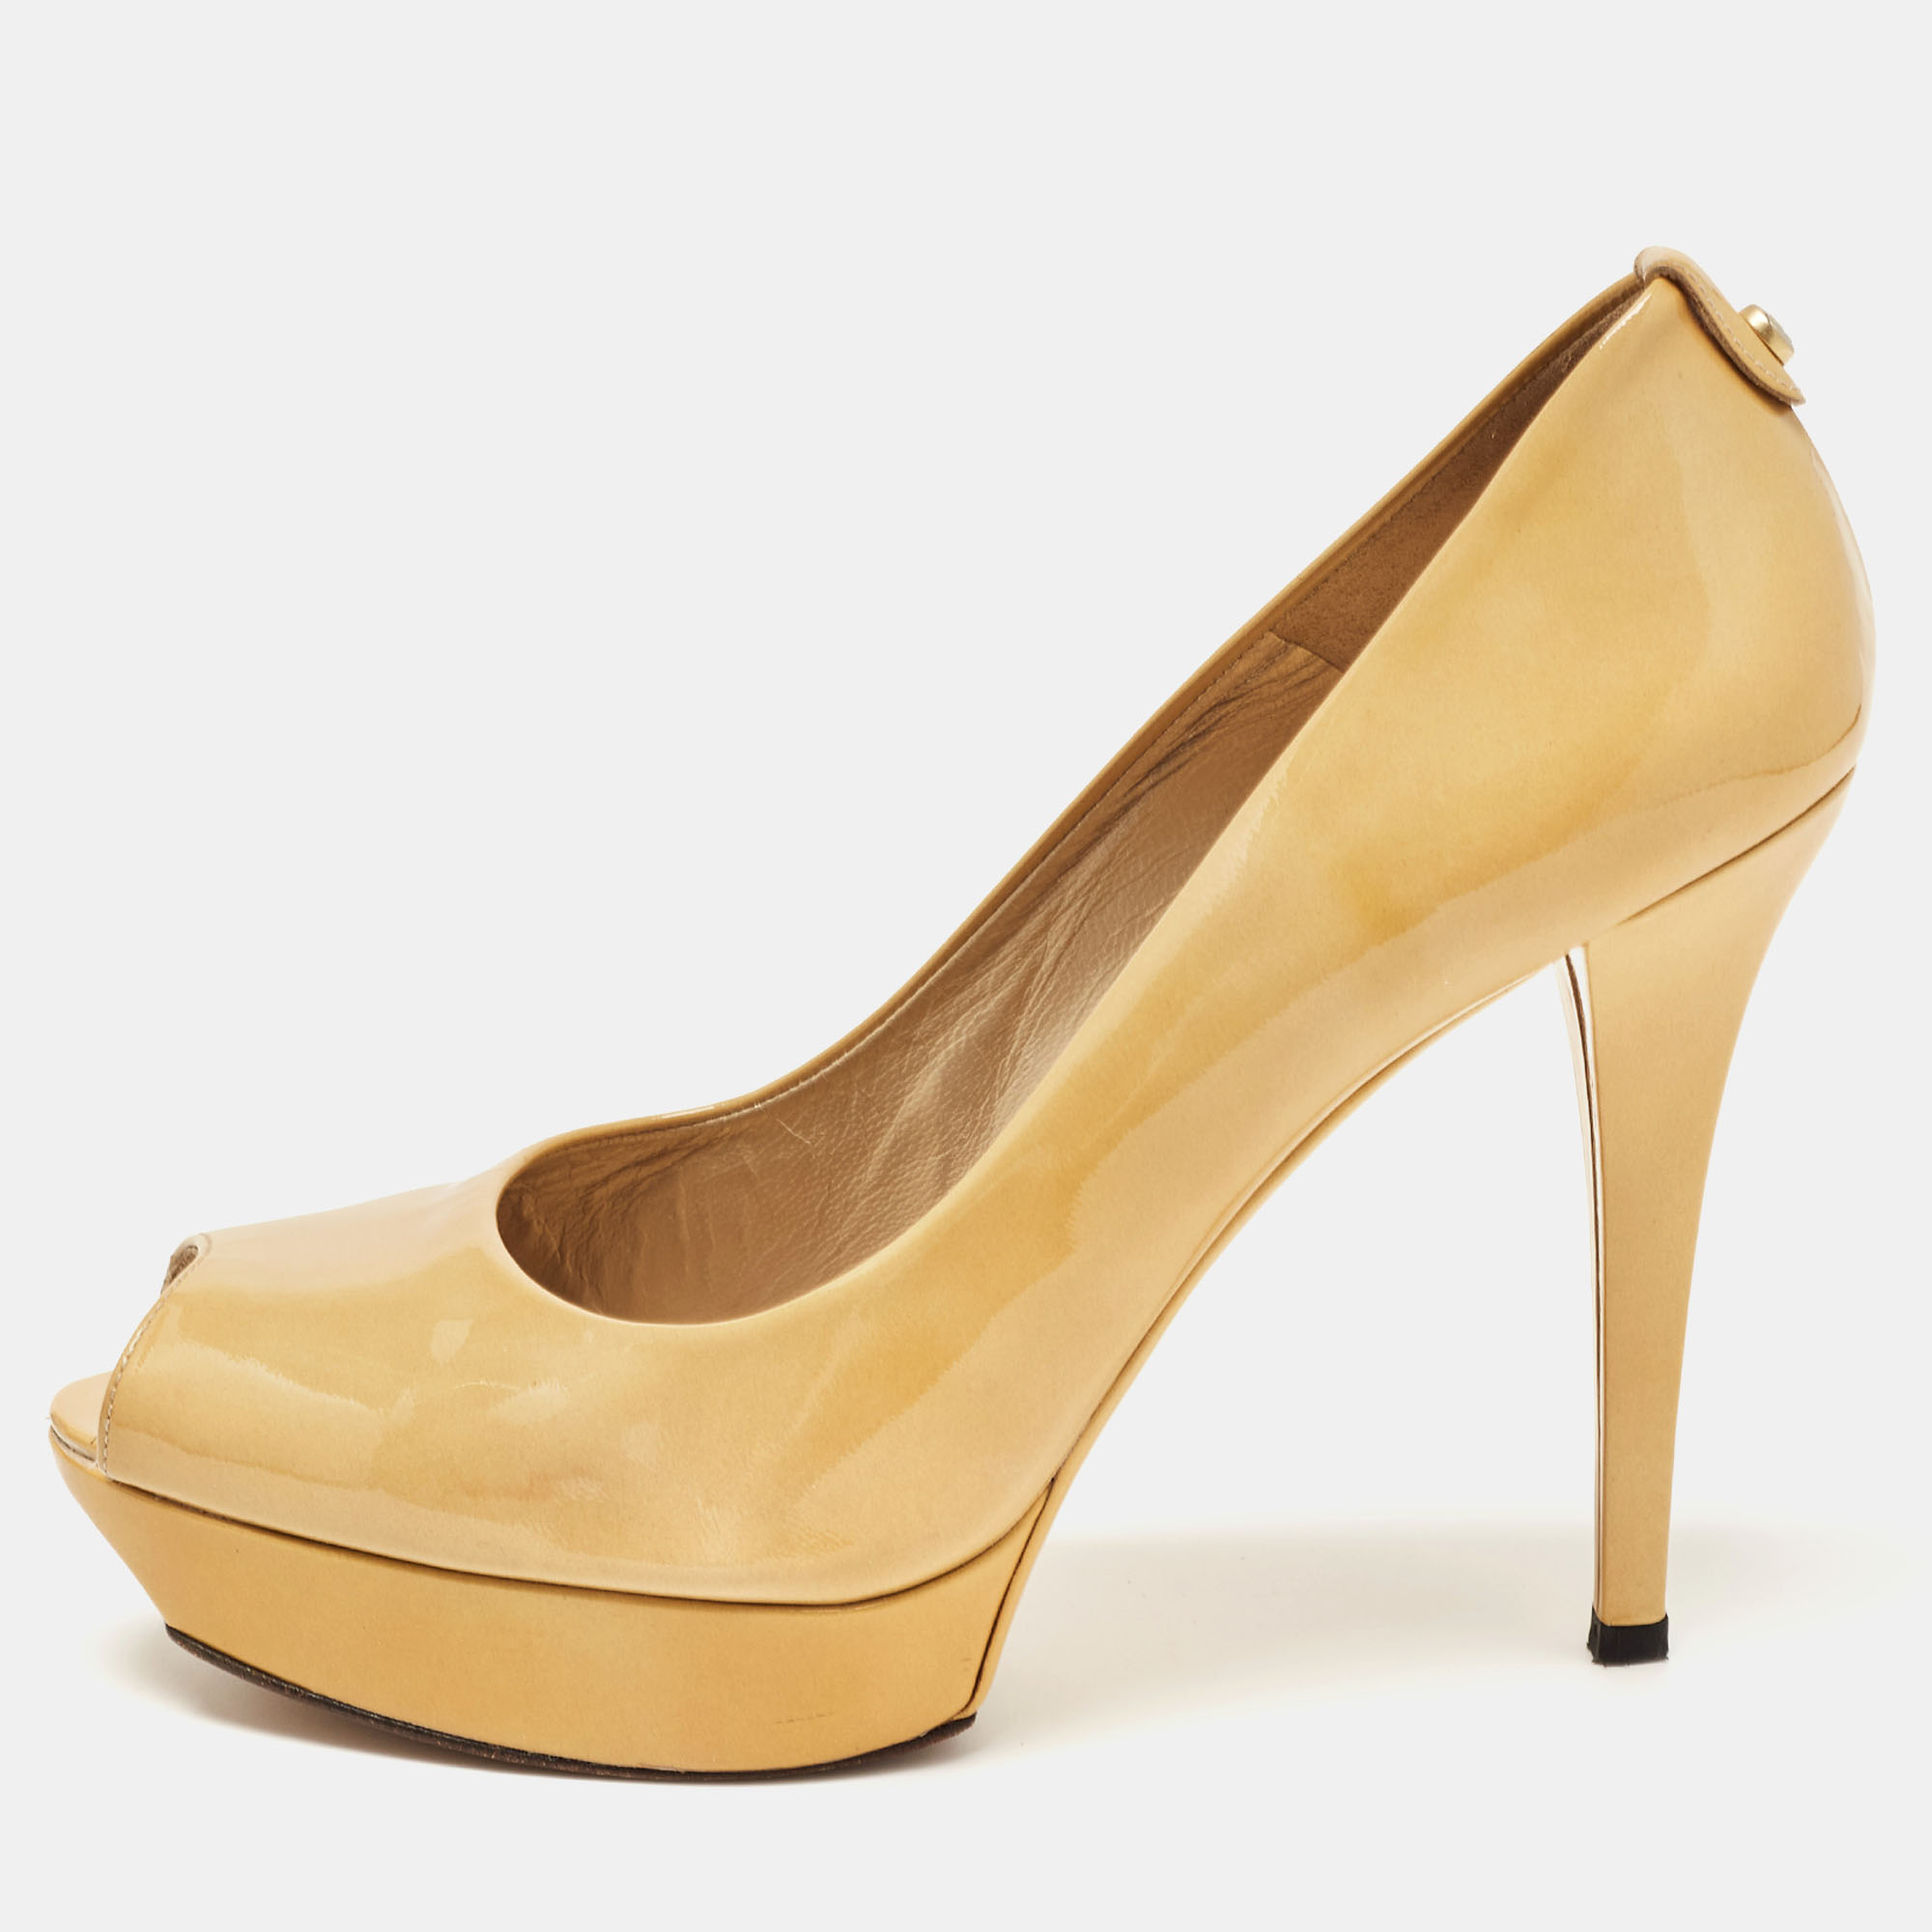 Wonderfully crafted shoes added with notable elements to fit well and pair perfectly with all your plans. Make these Stuart Weitzman yellow pumps yours today